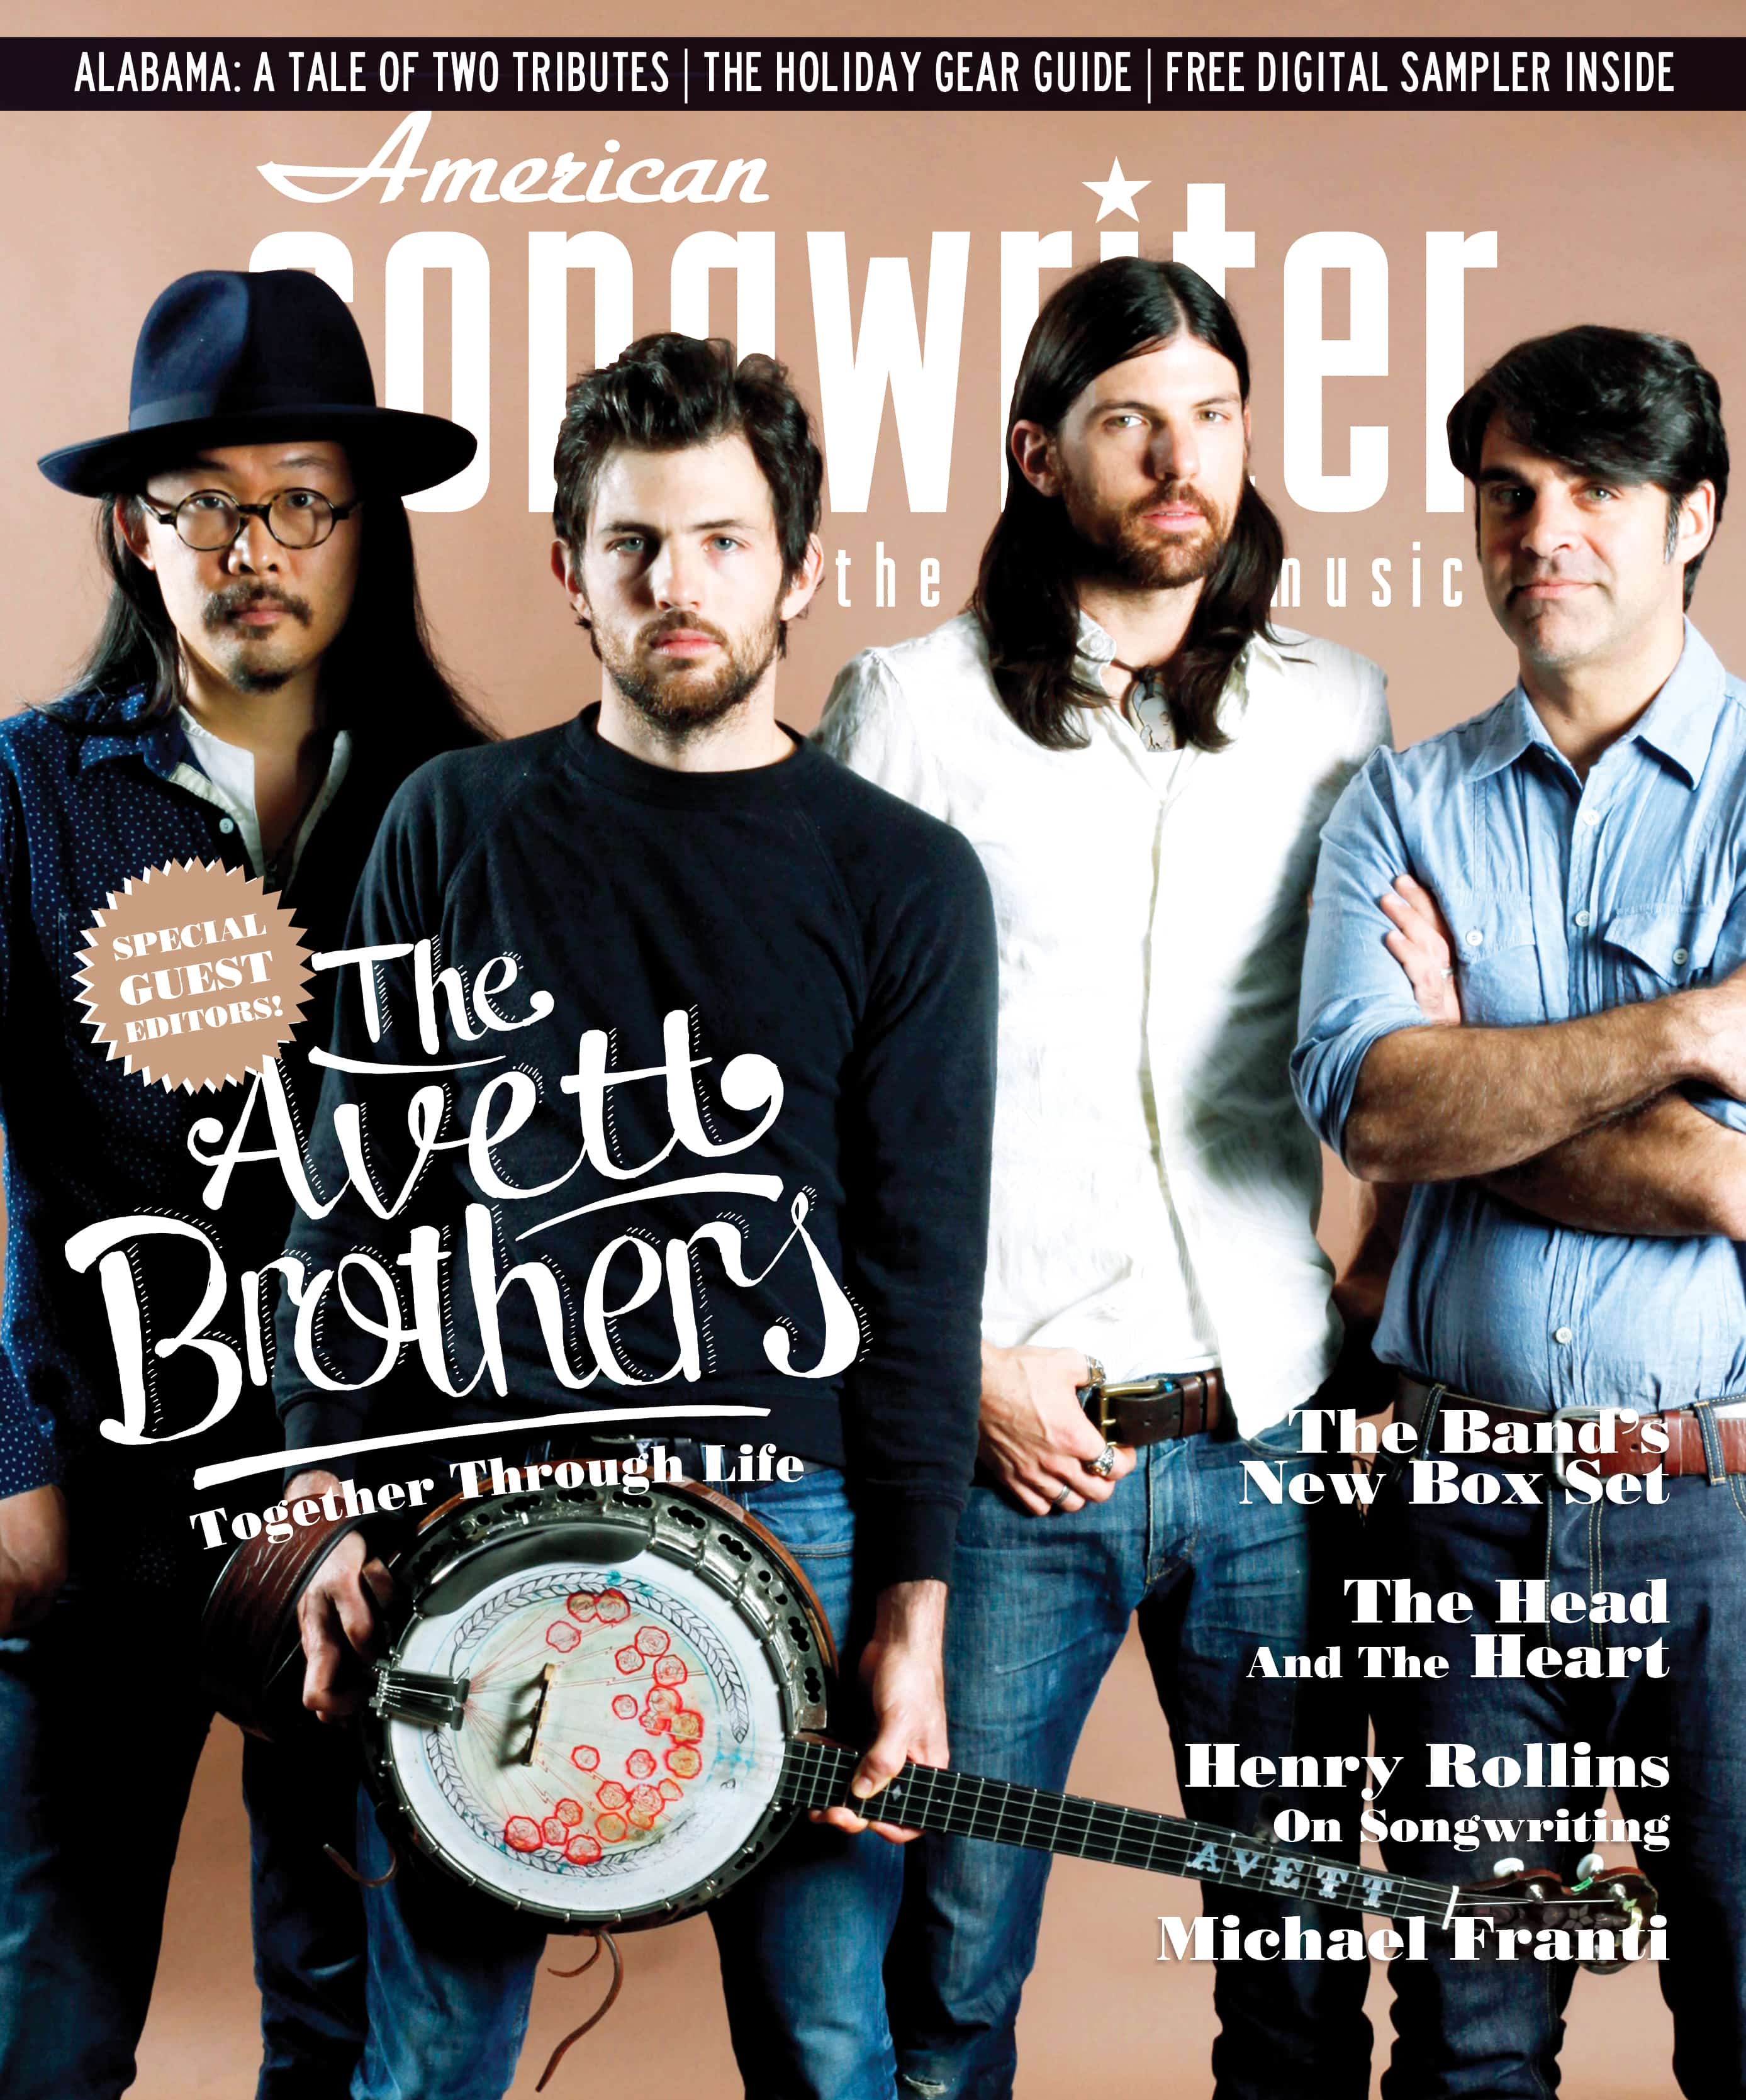 View the November/December 2013 Digital Edition feat. The Avett Brothers